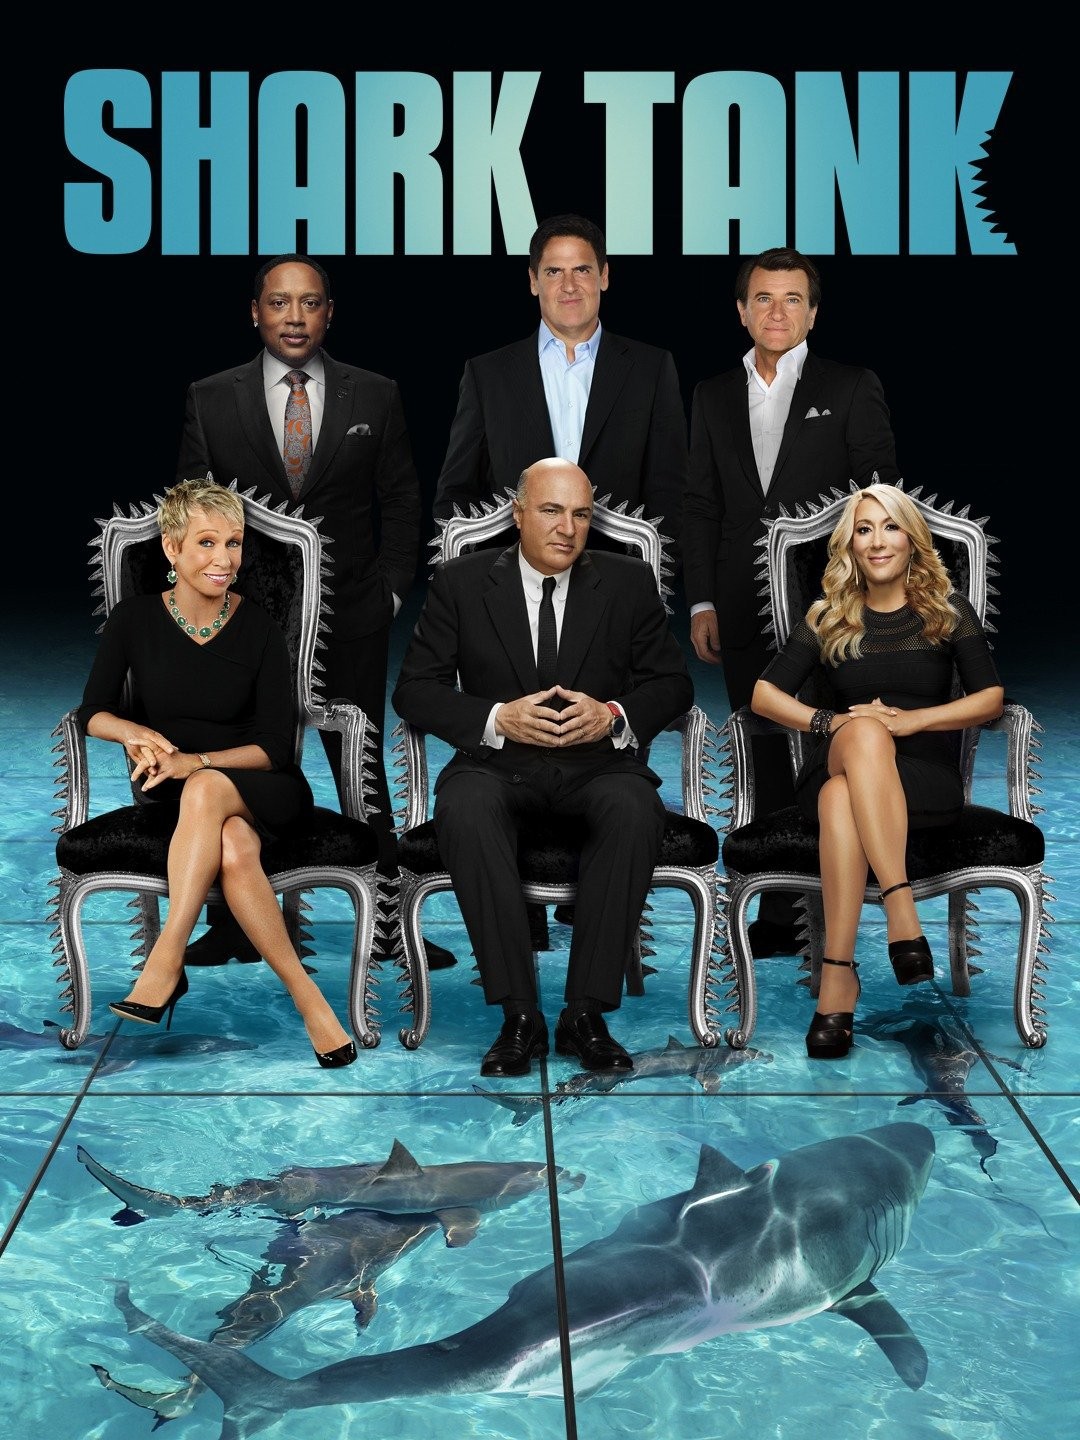 Draft Top: Here's What Happened After Shark Tank